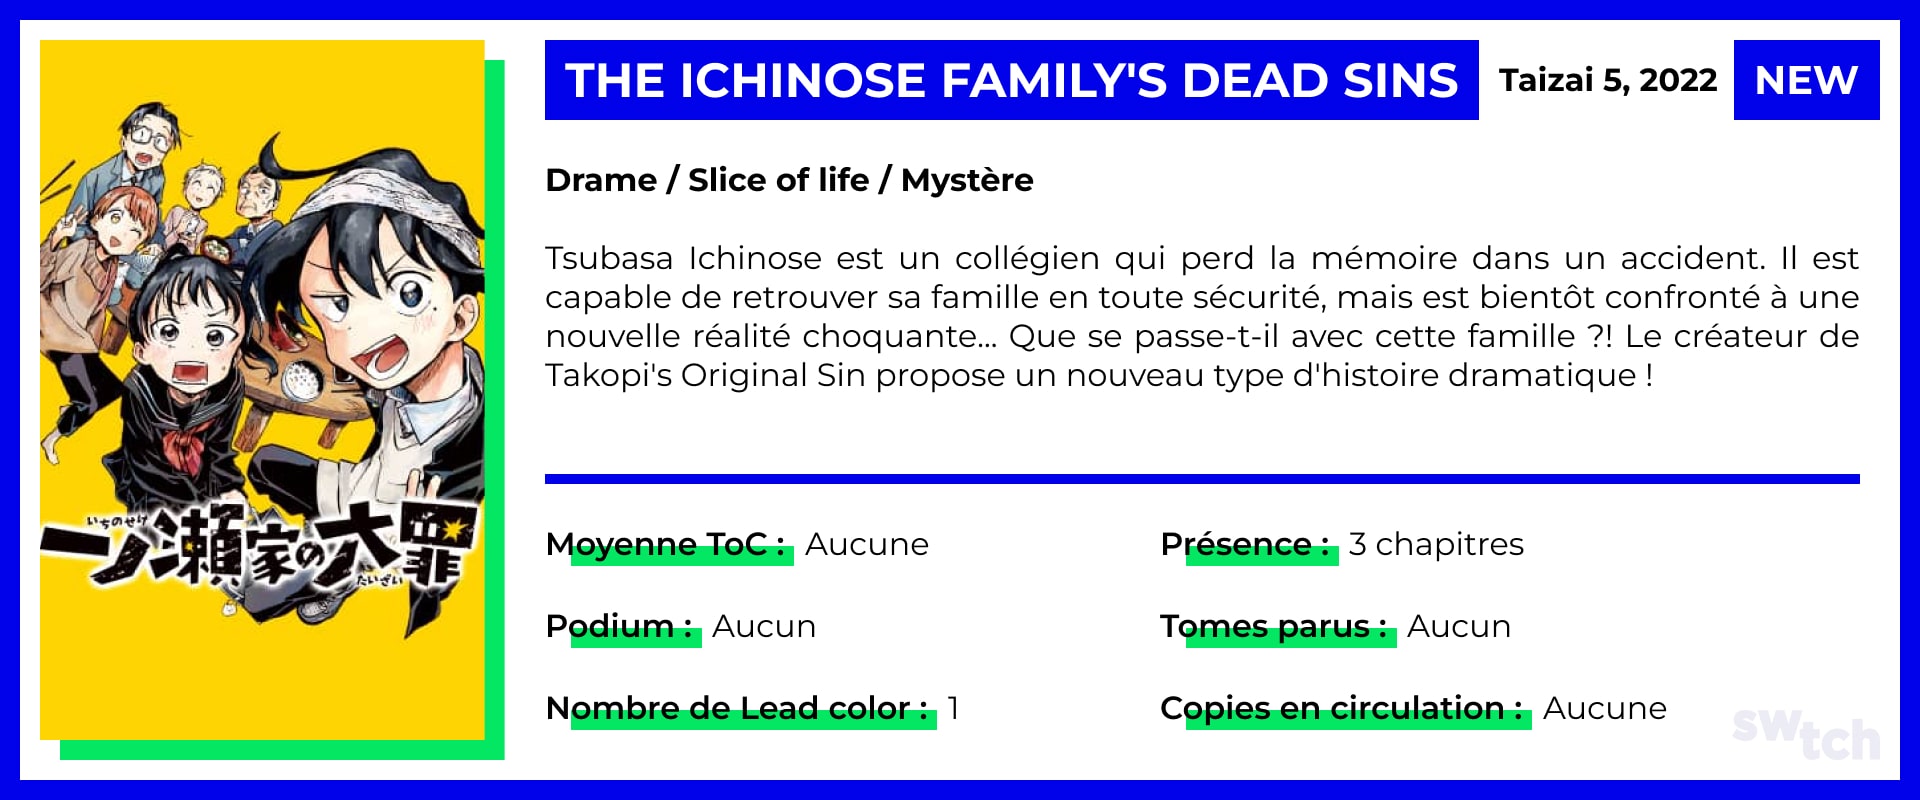 The Ichinose Family's Dead Sins